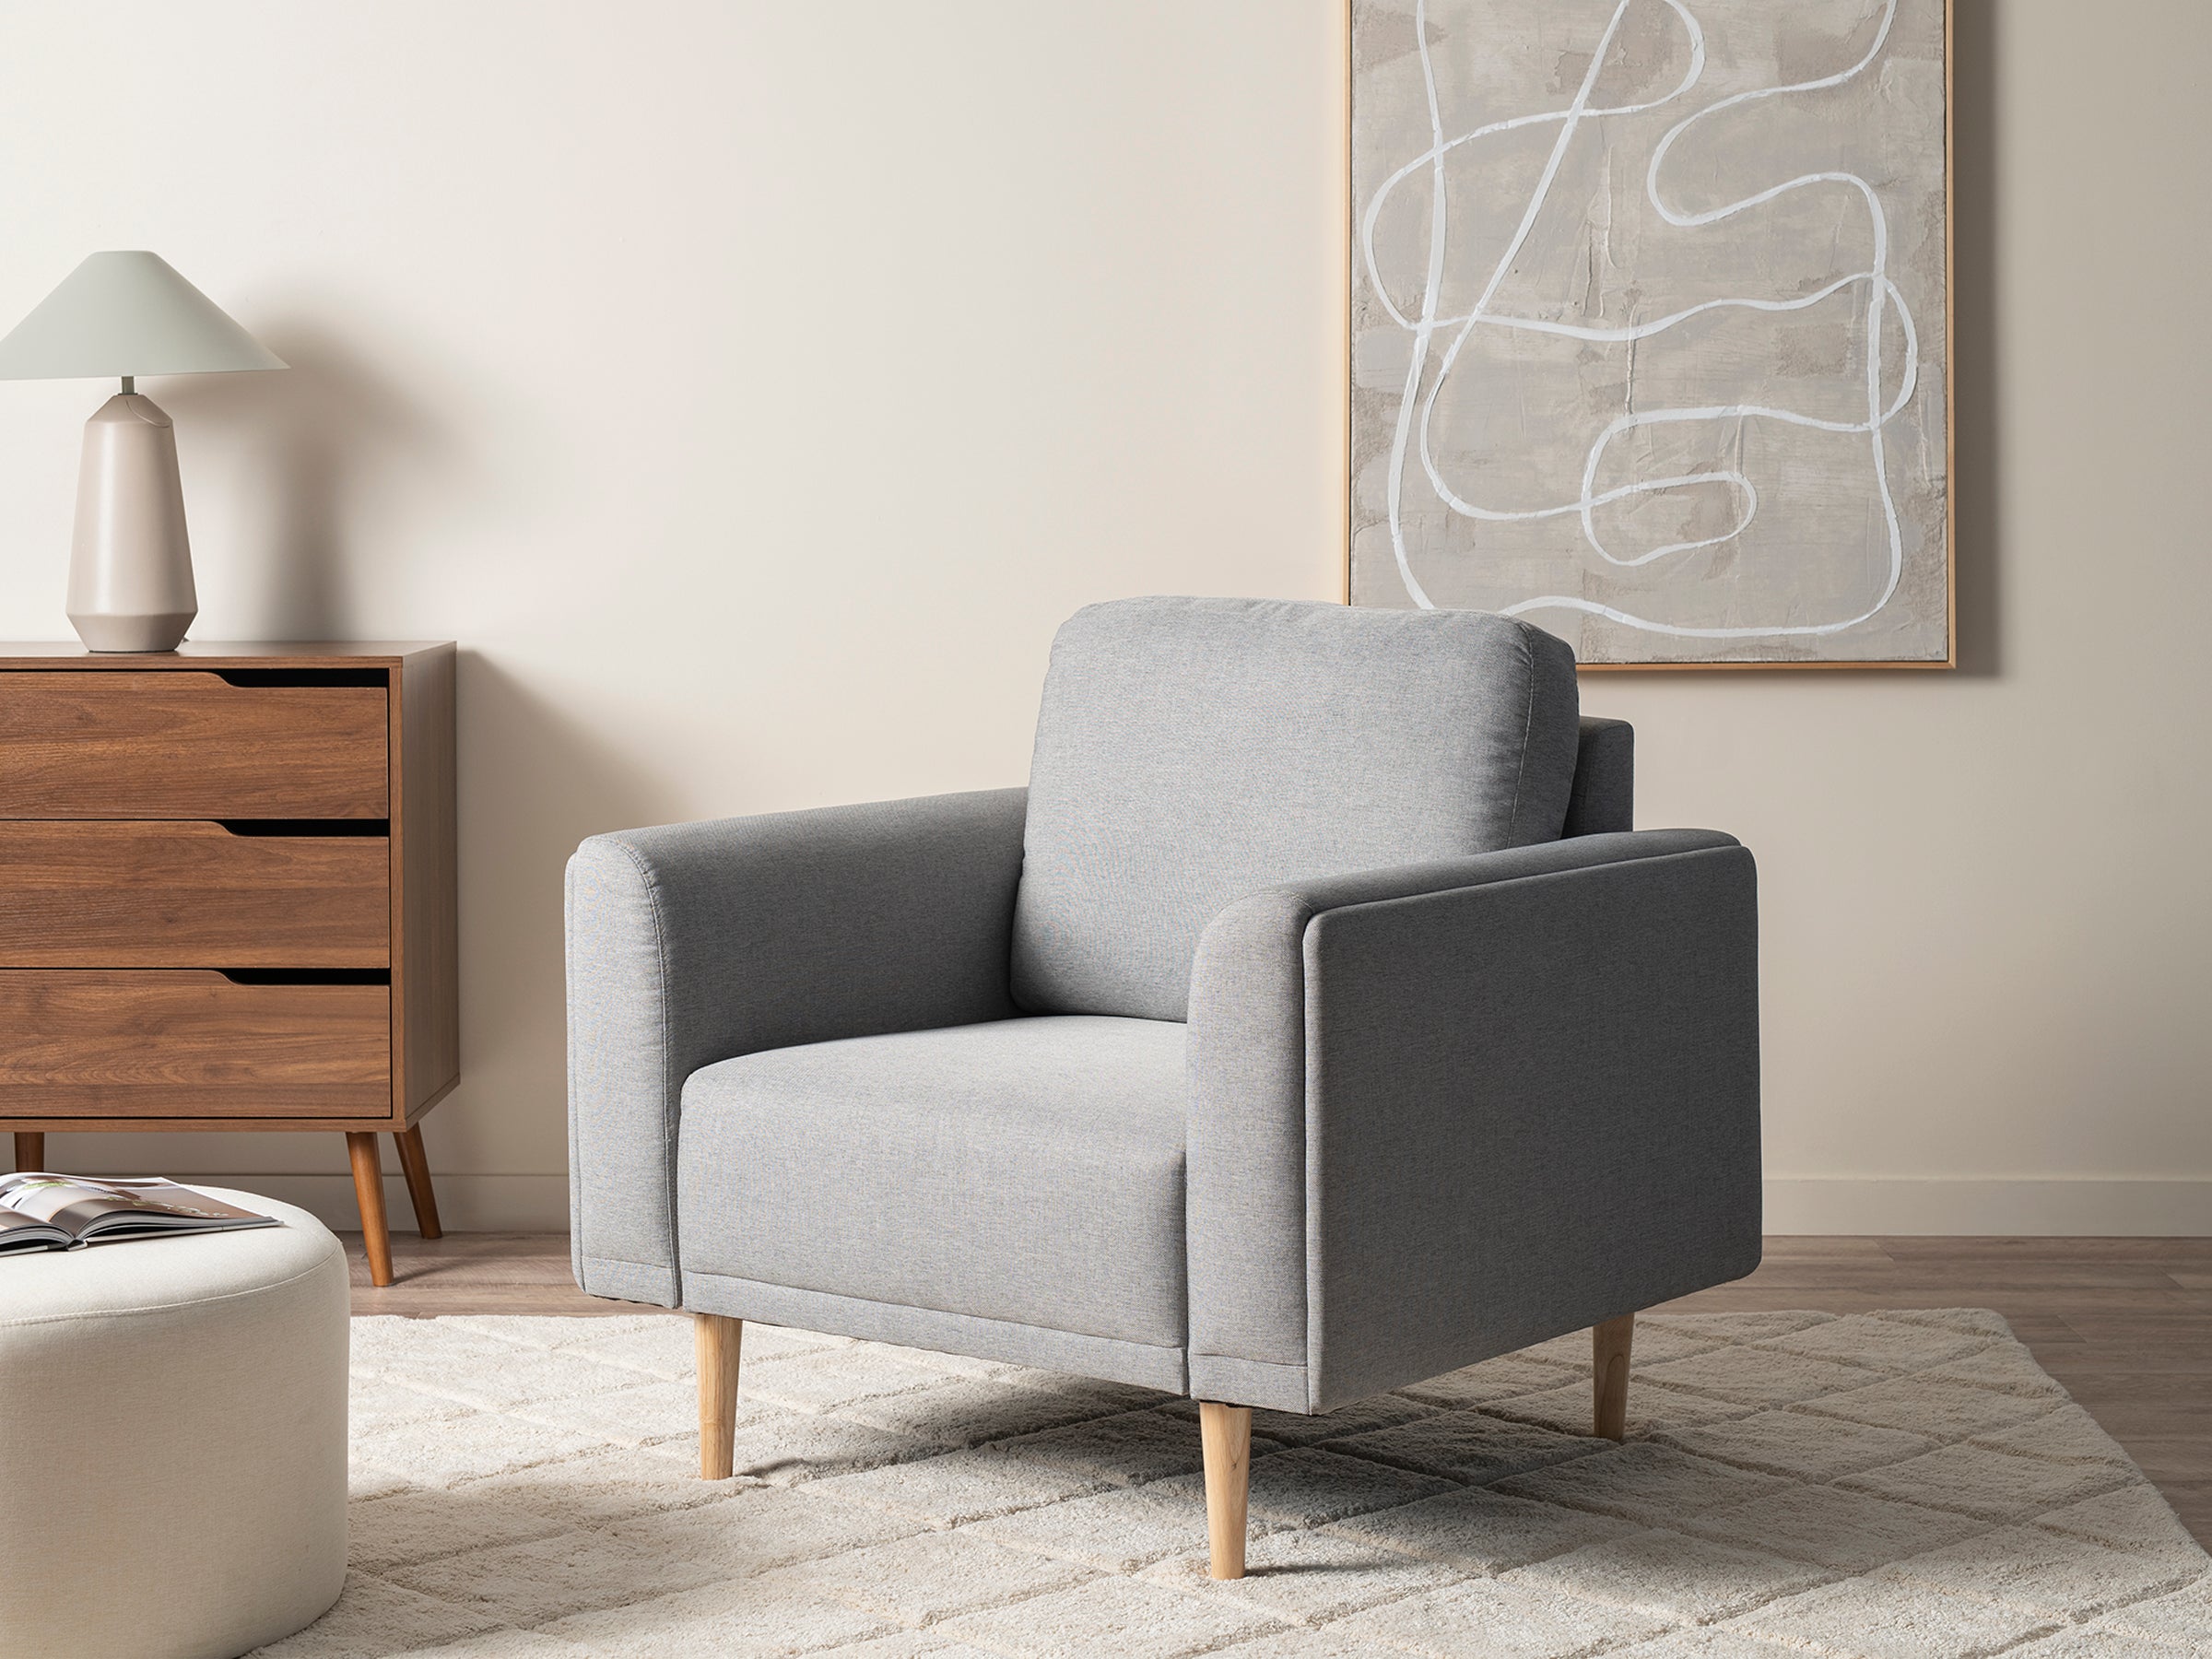 Mocka - Grey Chair With Wooden Legs